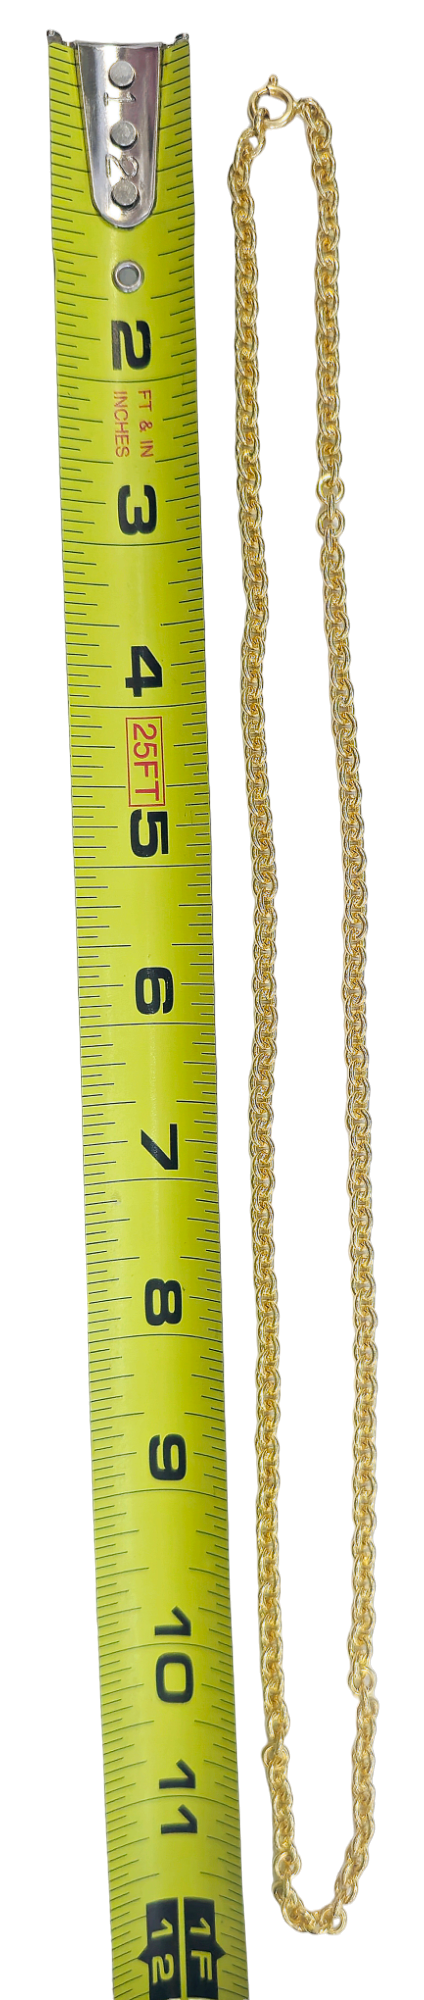 Large Rolo chain made in solid 18-karat yellow gold 24 inches